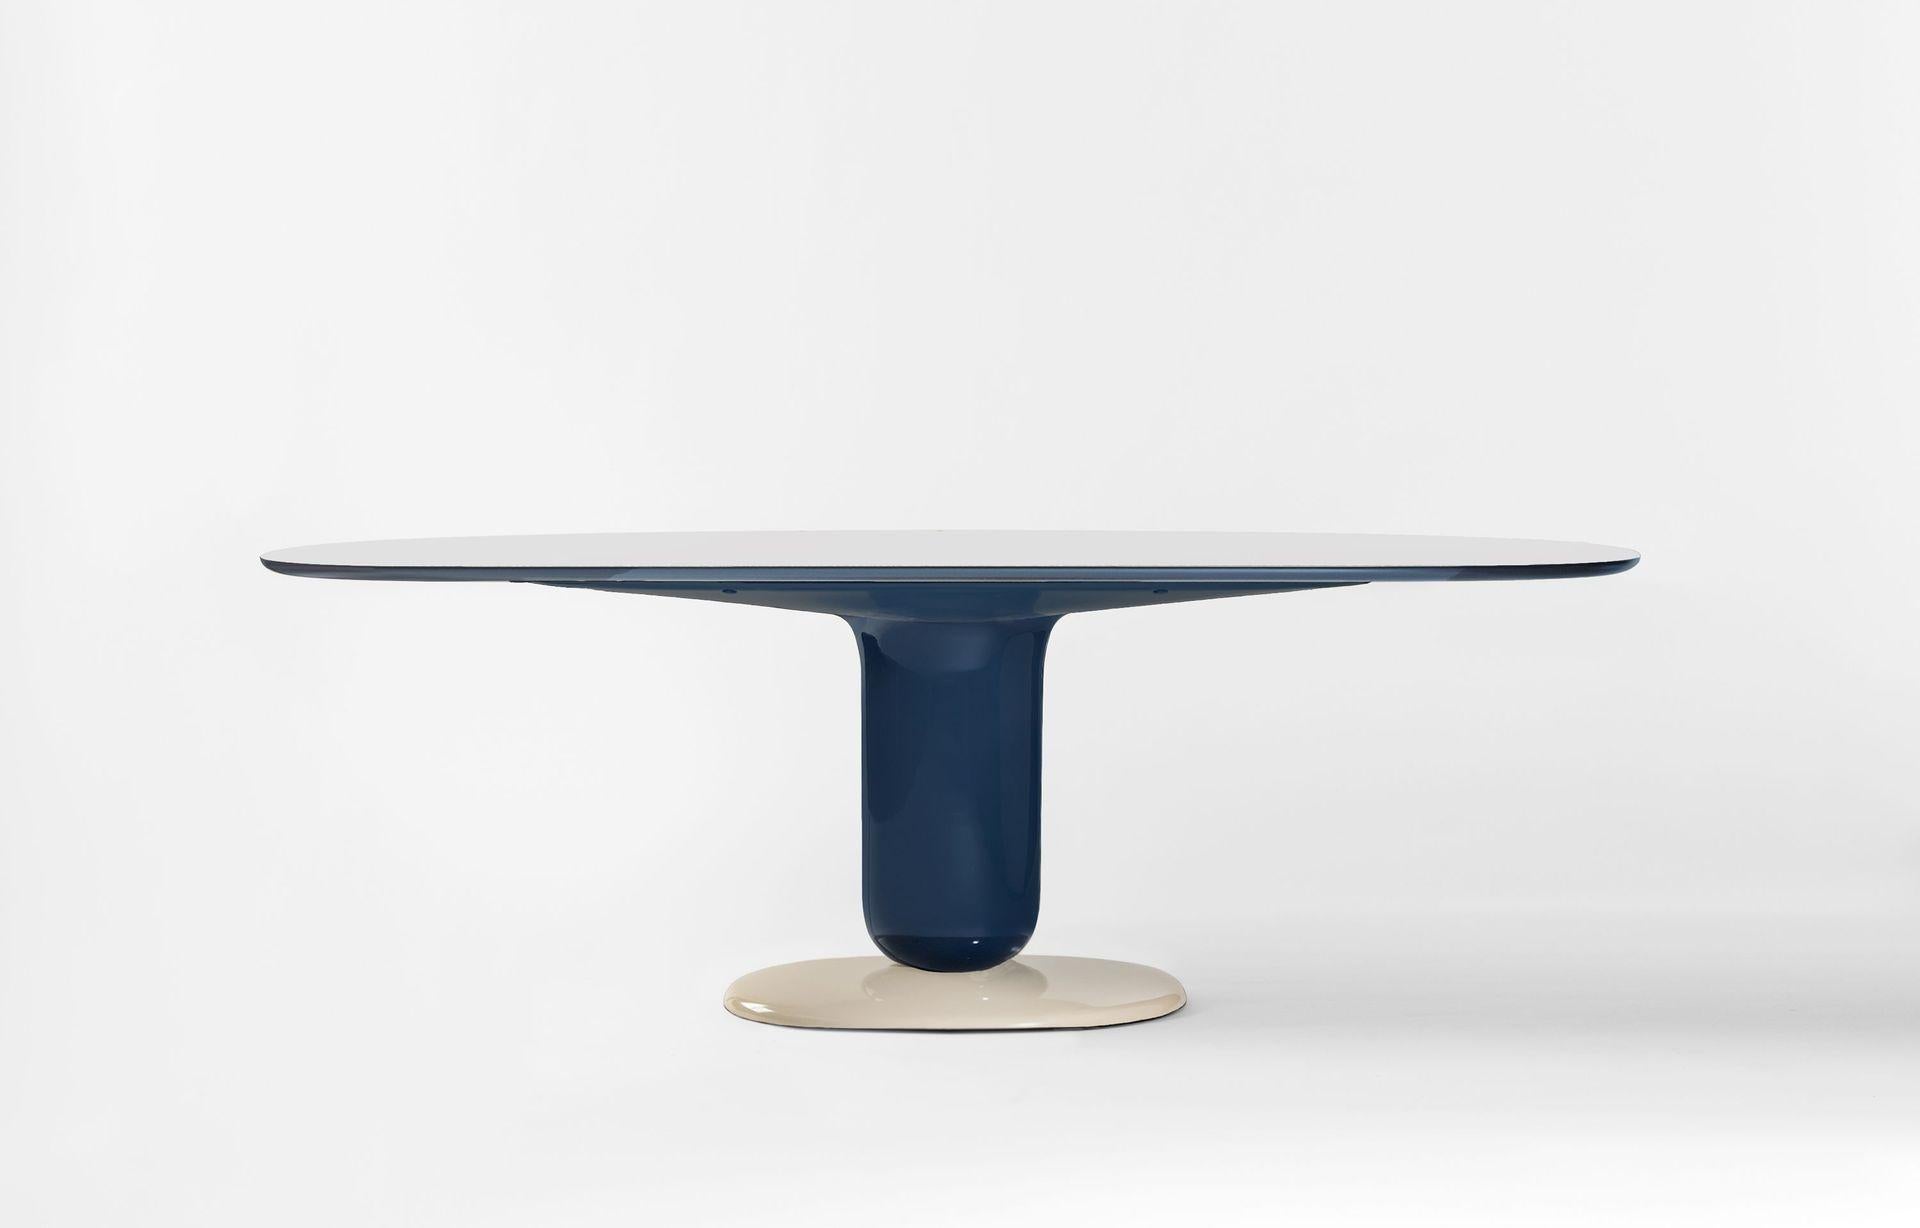 Table designed by Jaime Hayon in 2021, added to the Explorer collection that started in 2019.
Manufactured by BD Barcelona in Spain.

As a continuation of the playful Explorer Table series and following its elegant beauty, we are proud to introduce